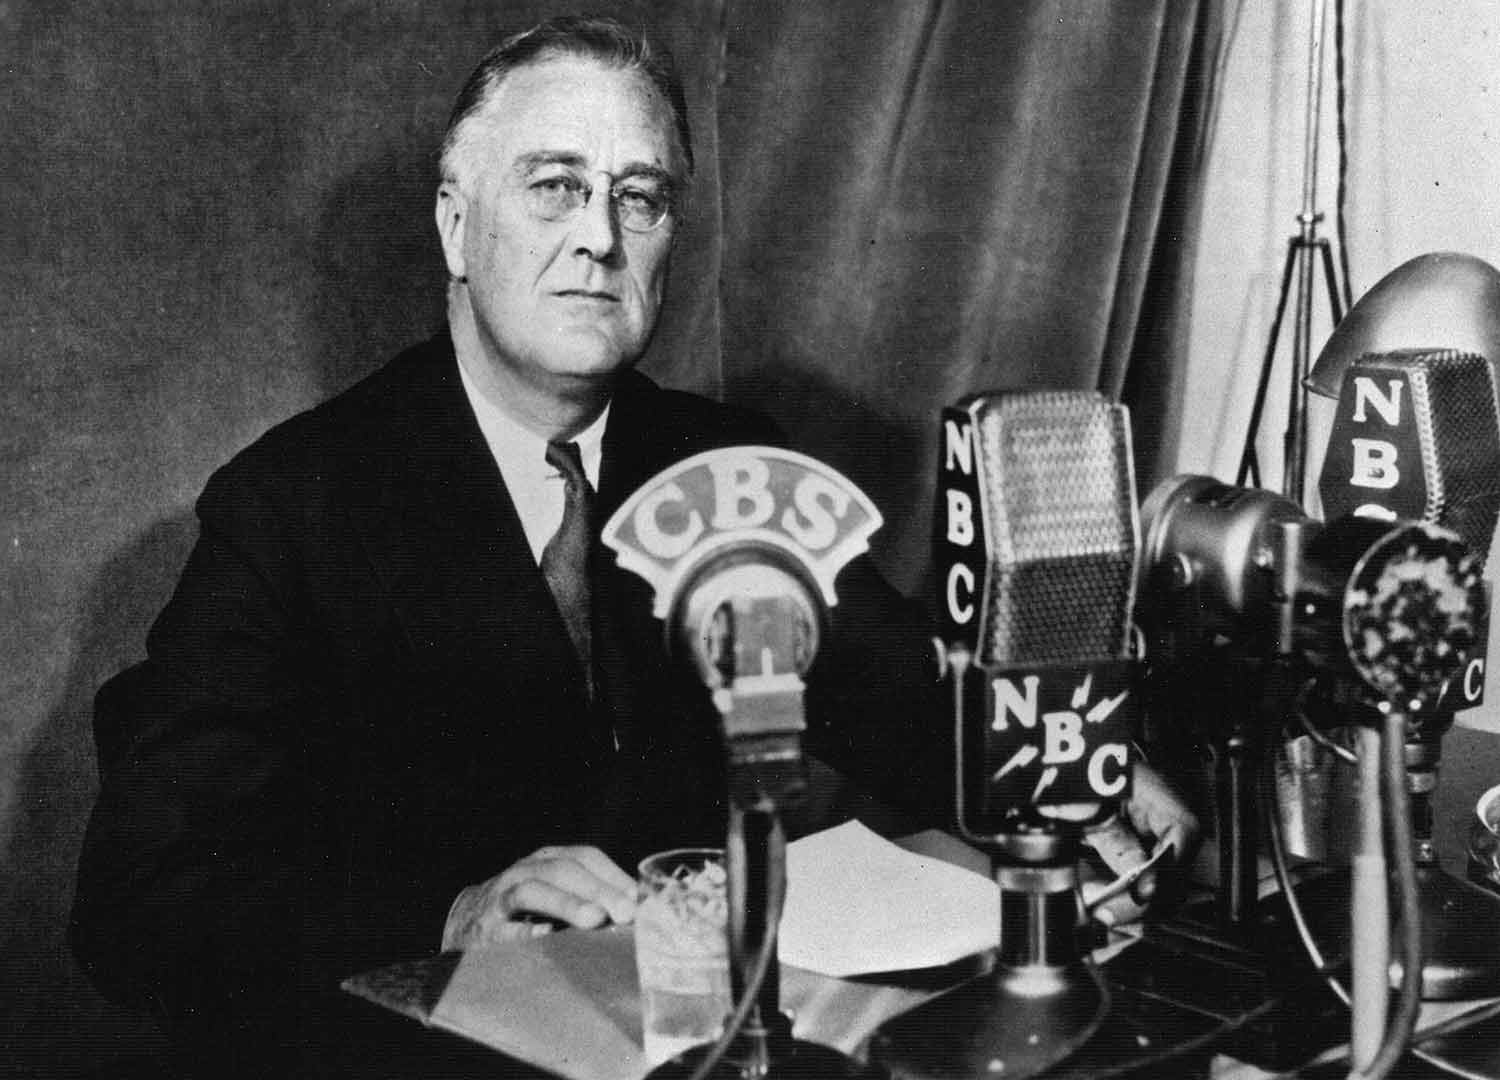 Franklin D. Roosevelt sits in front of radio microphones and looks at the camera.